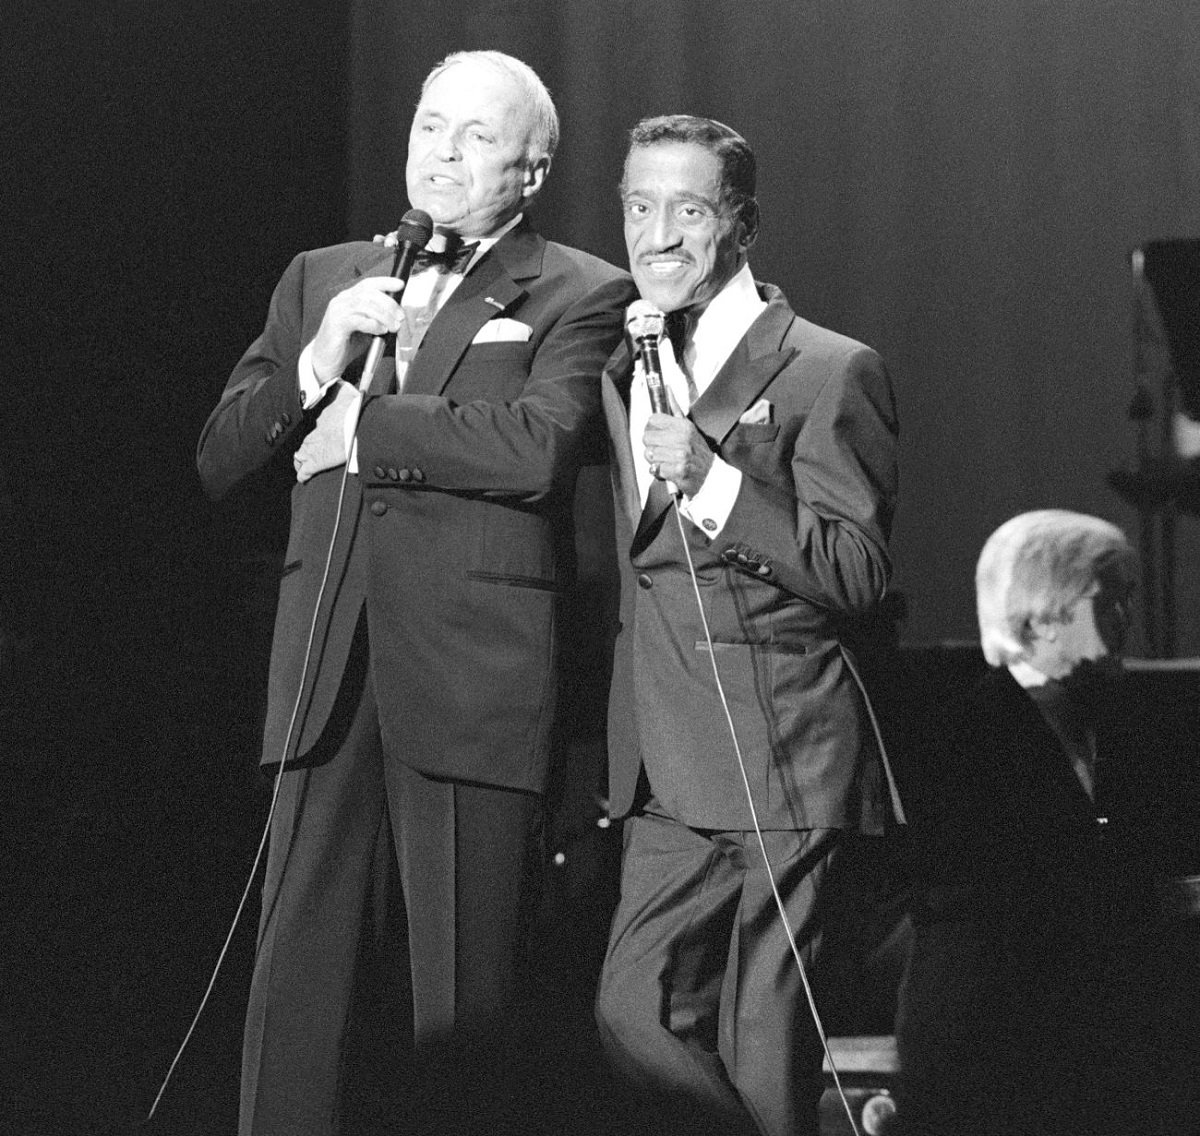 A black and white photo of Frank Sinatra and Sammy Davis Jr. wearing tuxedos and holding microphones.